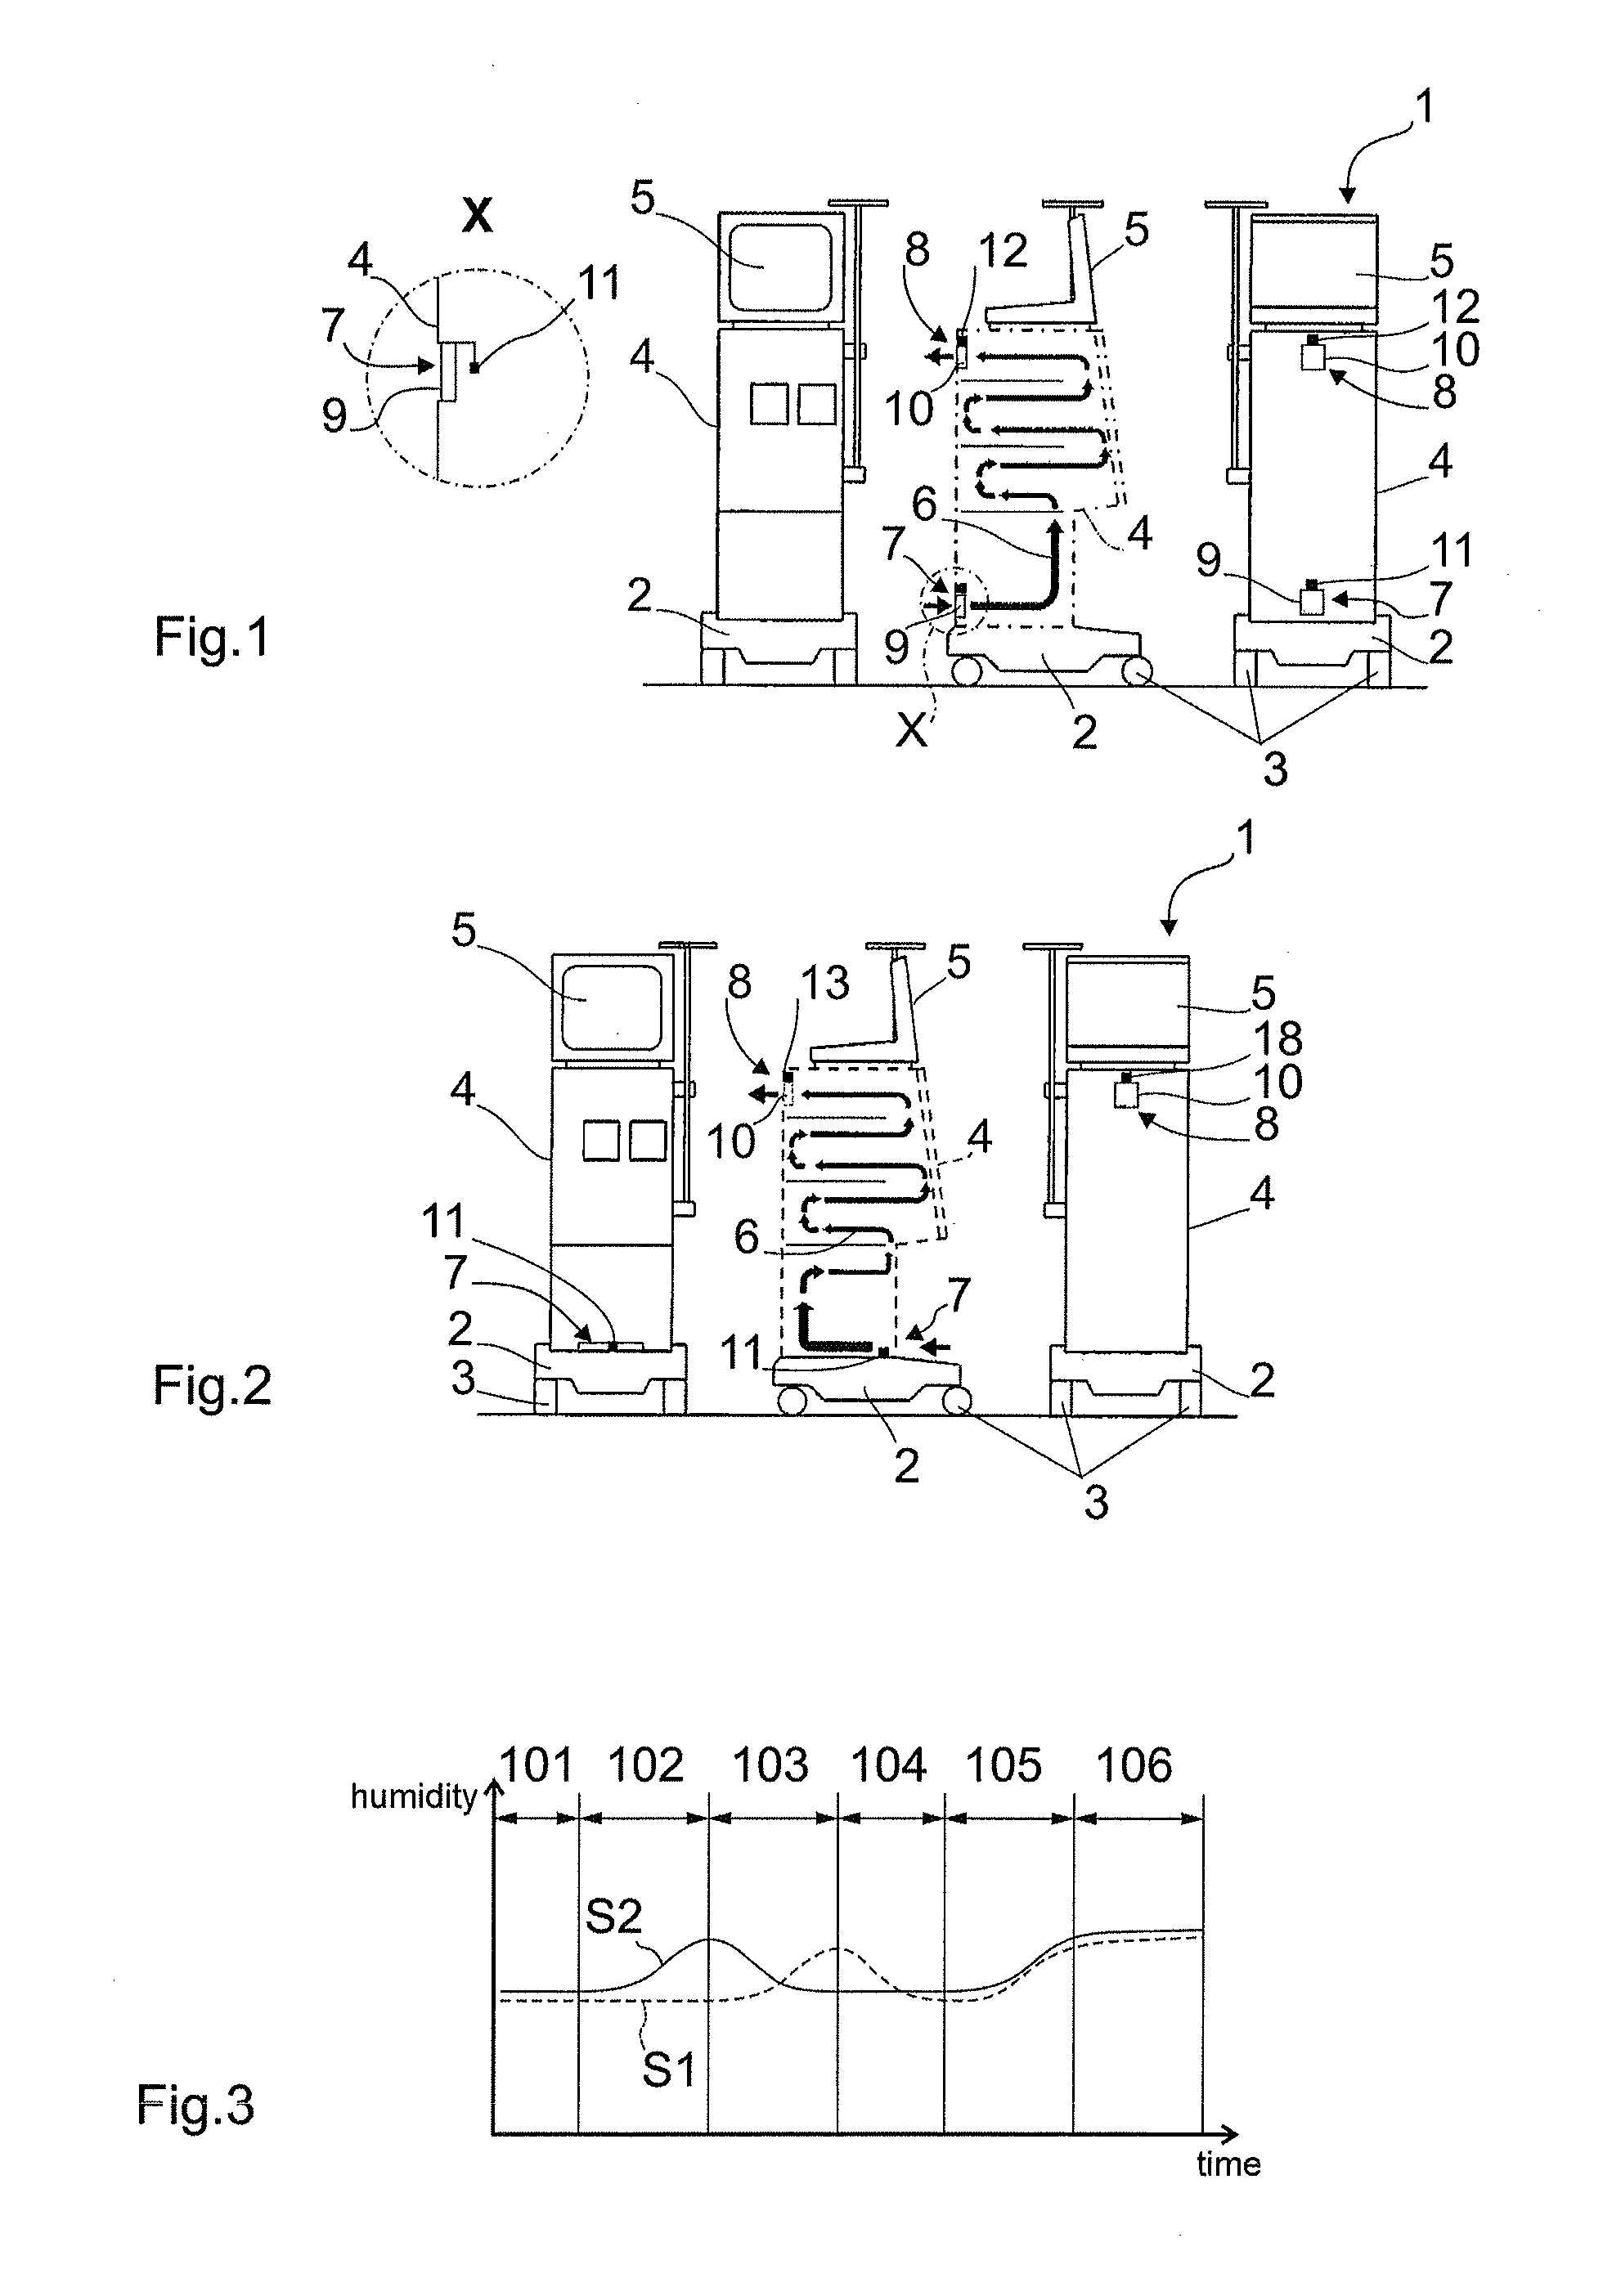 Extracorporeal blood treatment machine comprising leakage detection and method of detecting leakages in dialysis fluid systems